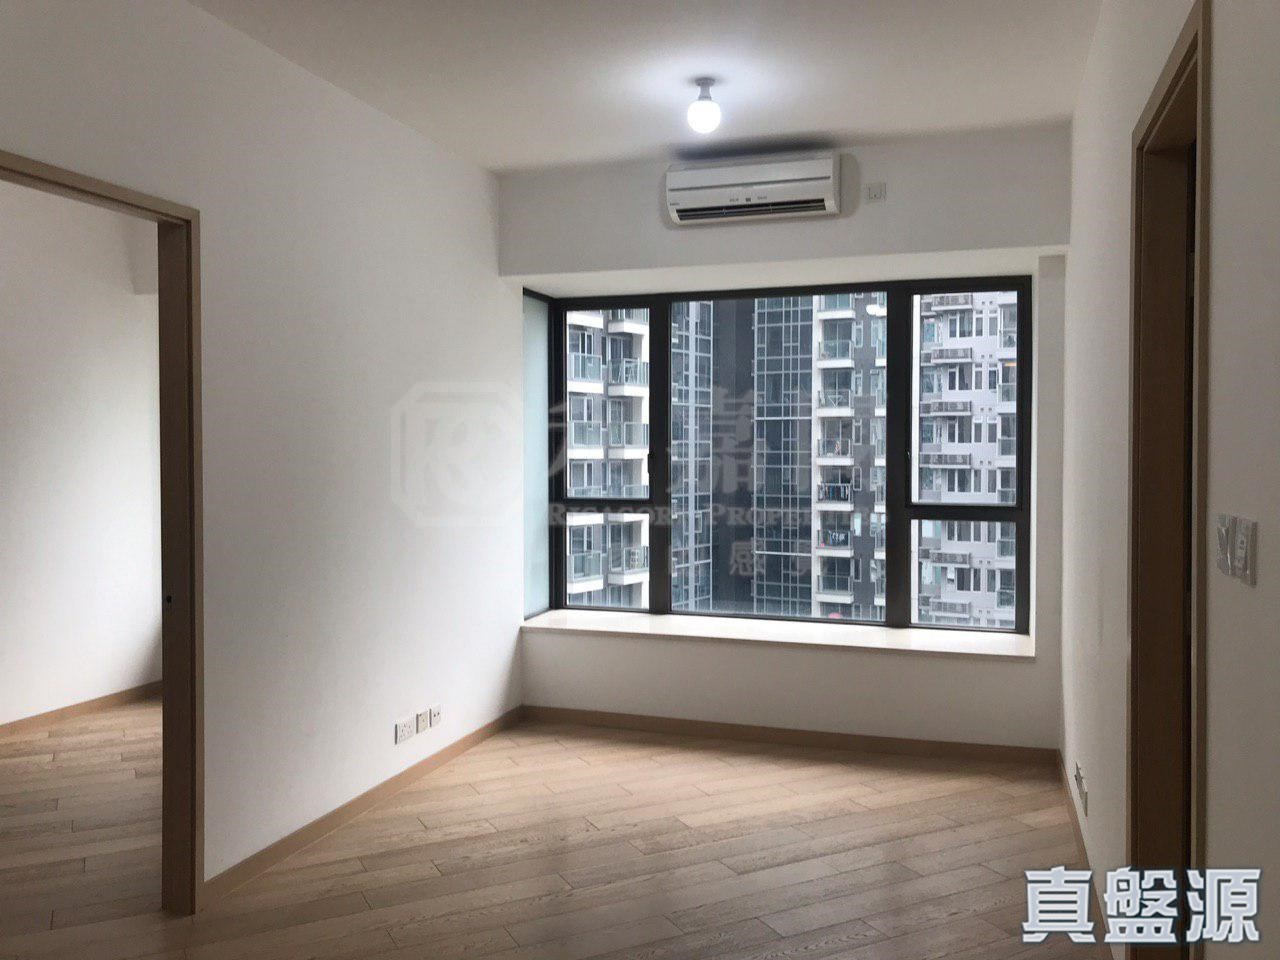 【RC GINNY】MIDDLE FLOOR 1 BR IN THE VISIONARY